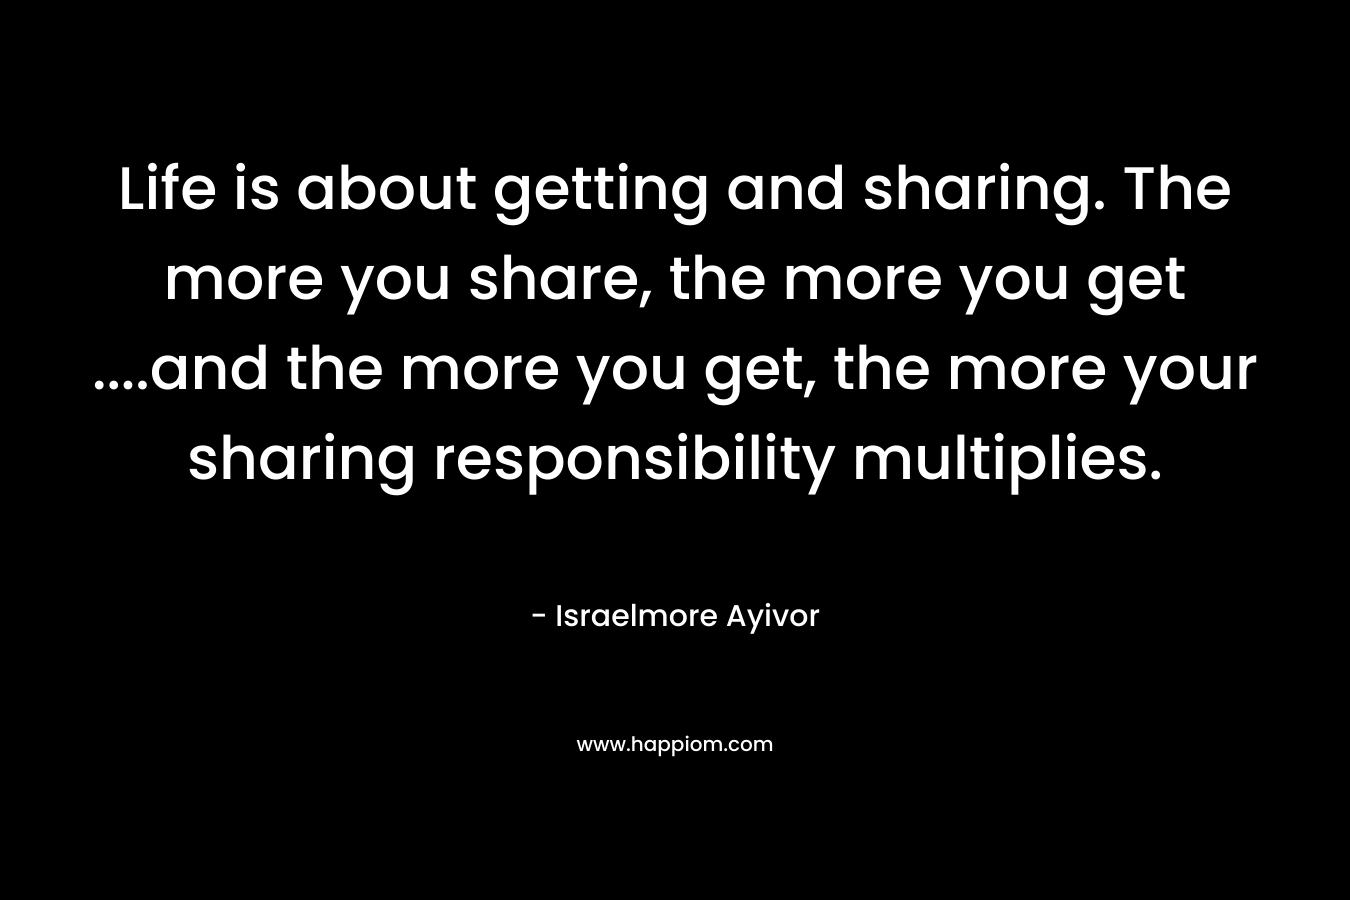 Life is about getting and sharing. The more you share, the more you get ....and the more you get, the more your sharing responsibility multiplies.